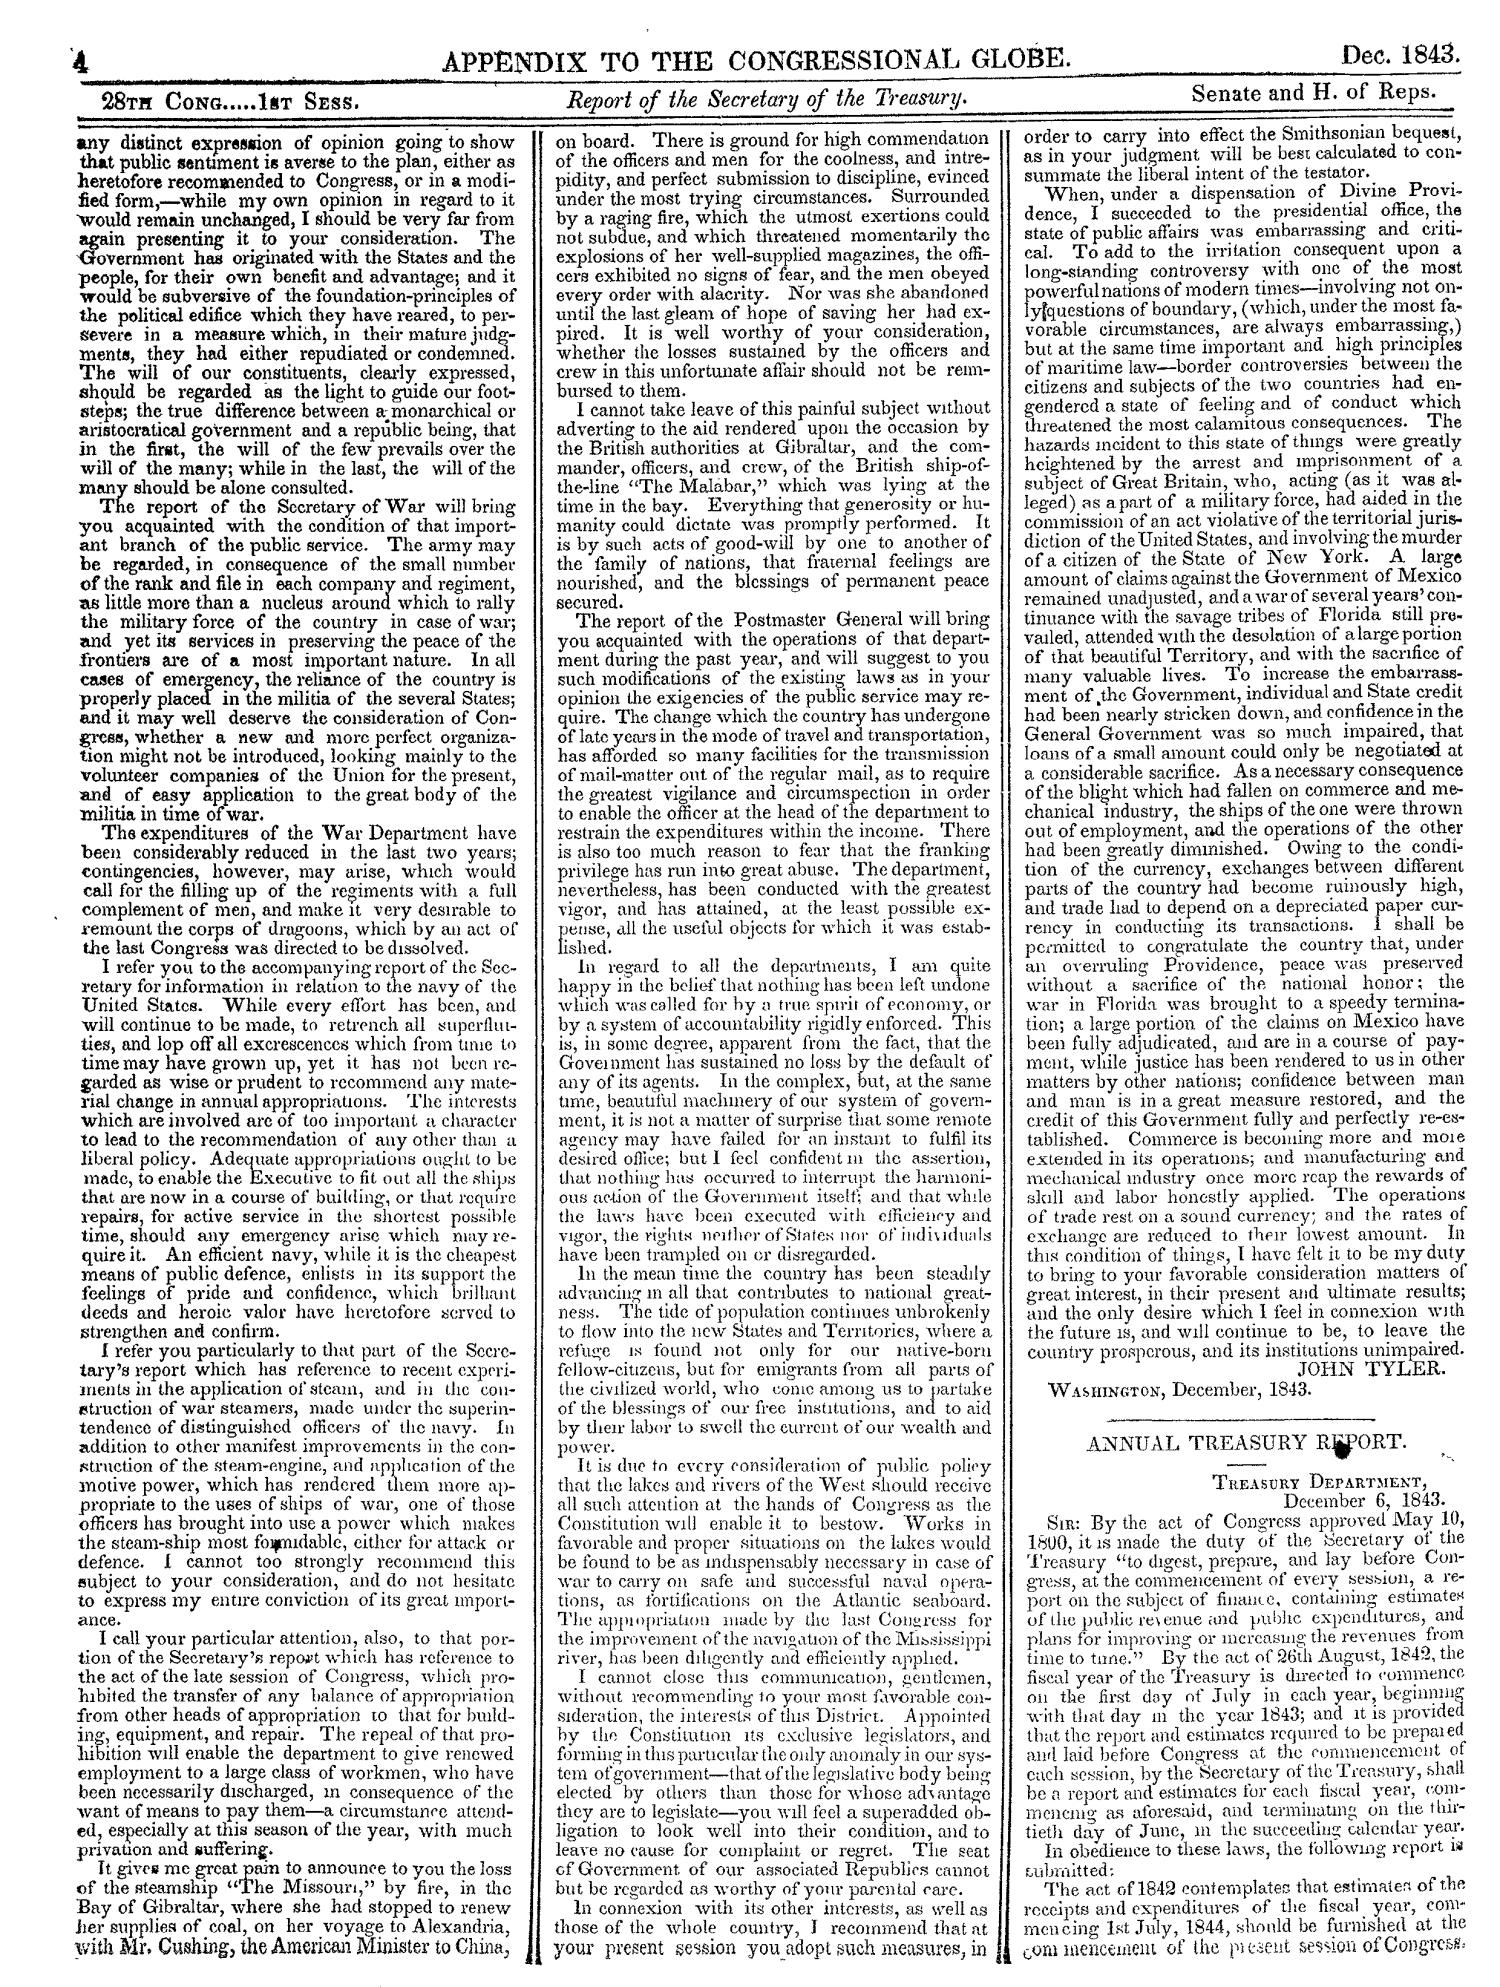 The Congressional Globe, Volume 13, Part 2: Twenty-Eighth Congress, First Session
                                                
                                                    4
                                                